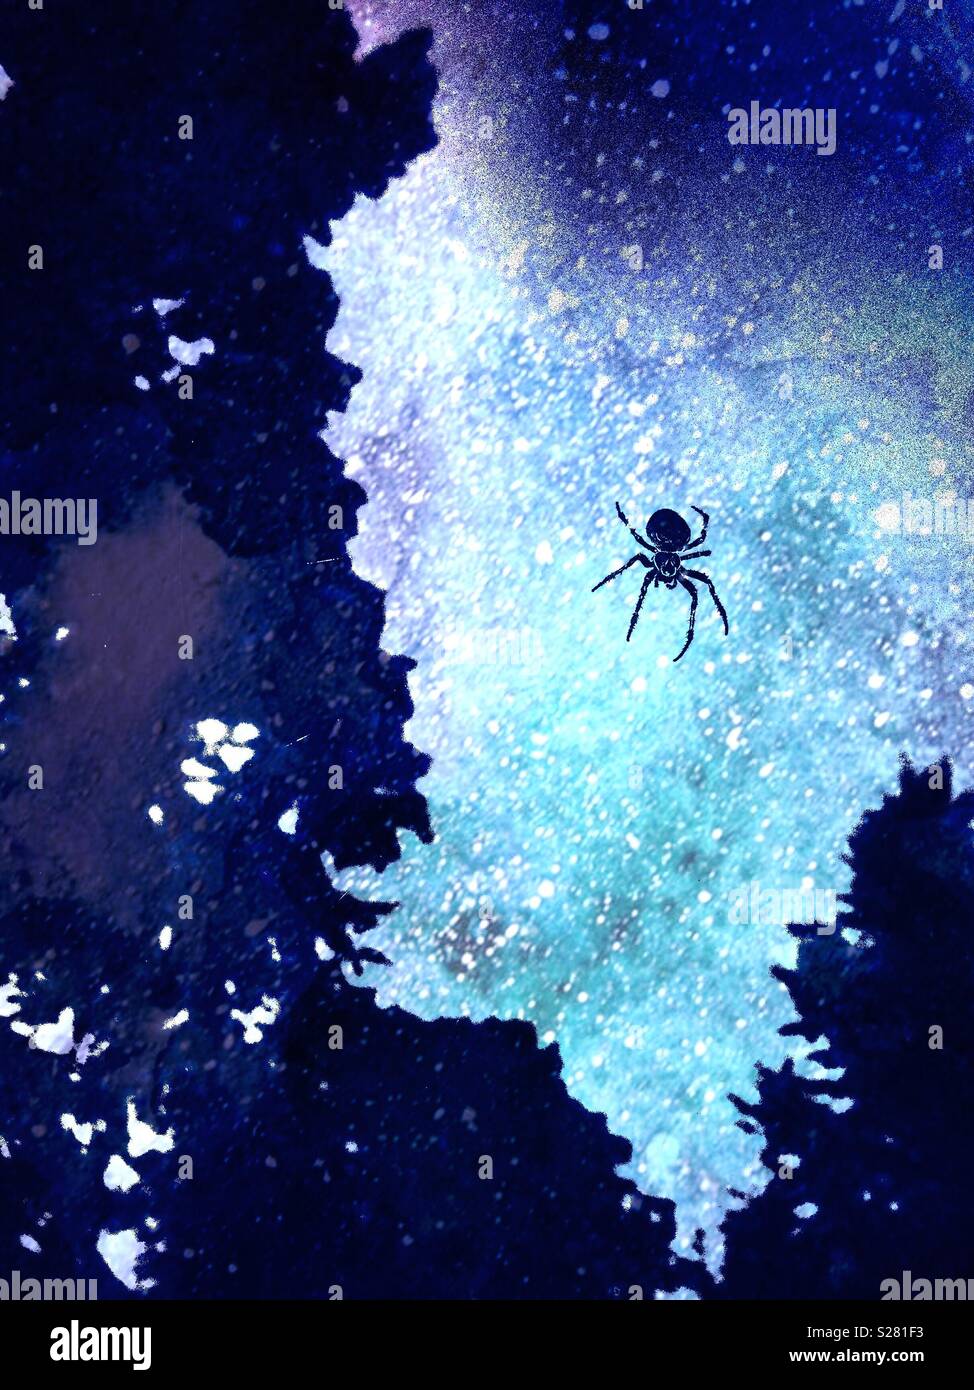 Science fiction fantasy silhouette of spider against creative night sky Stock Photo